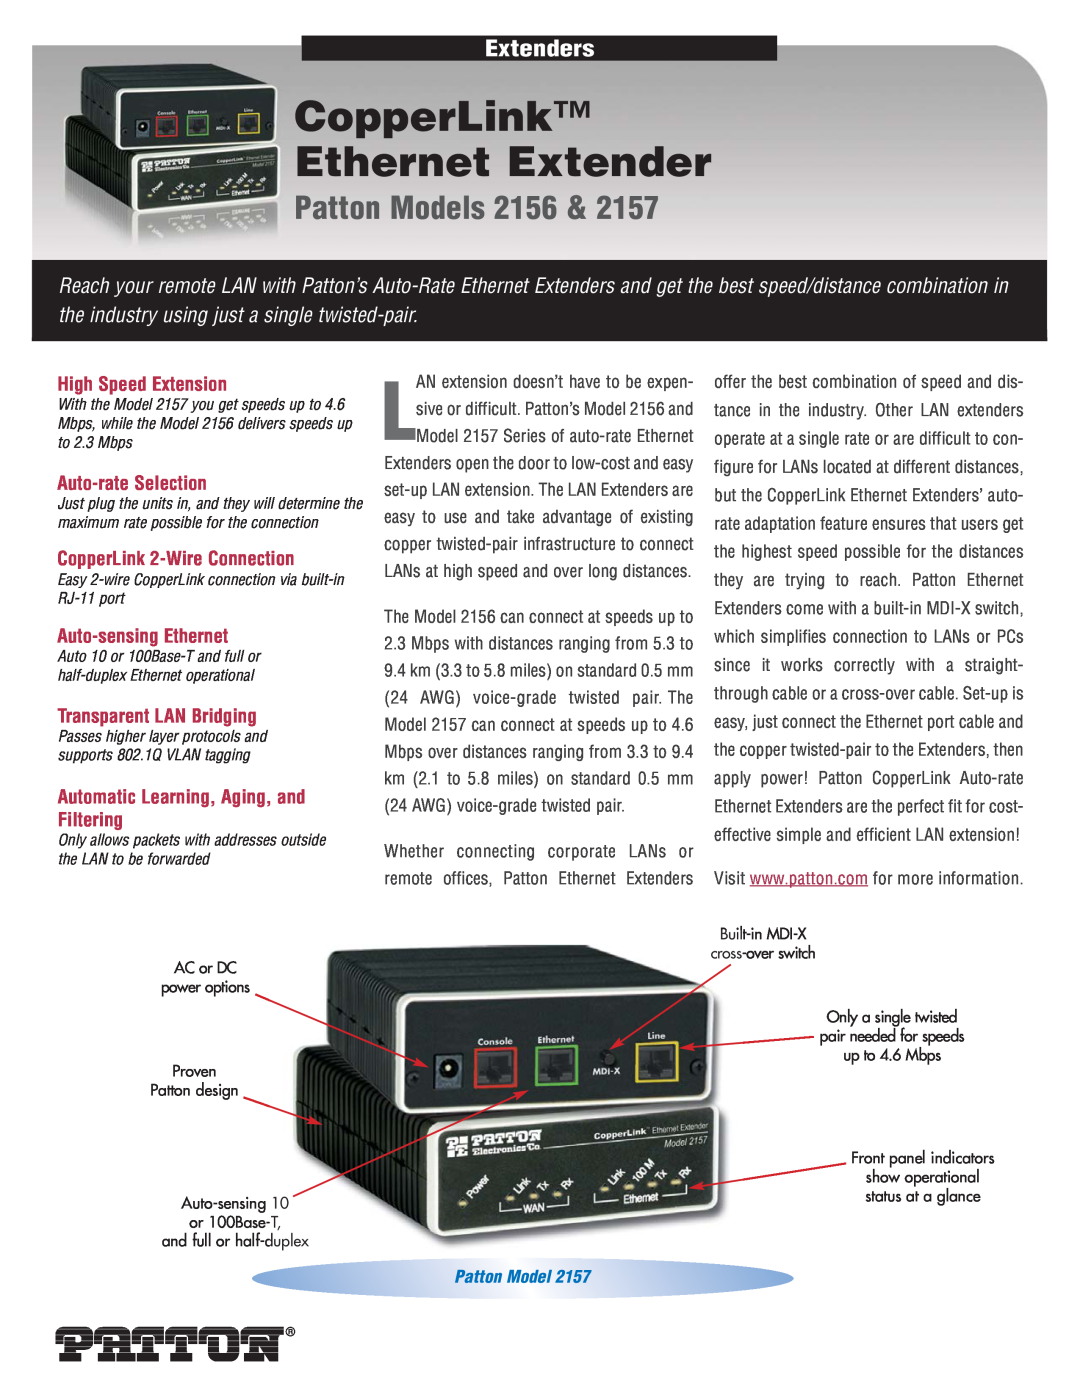 Patton electronic 2156 & 2157 manual CopperLink Ethernet Extender, Patton Models 2156, Extenders, High Speed Extension 